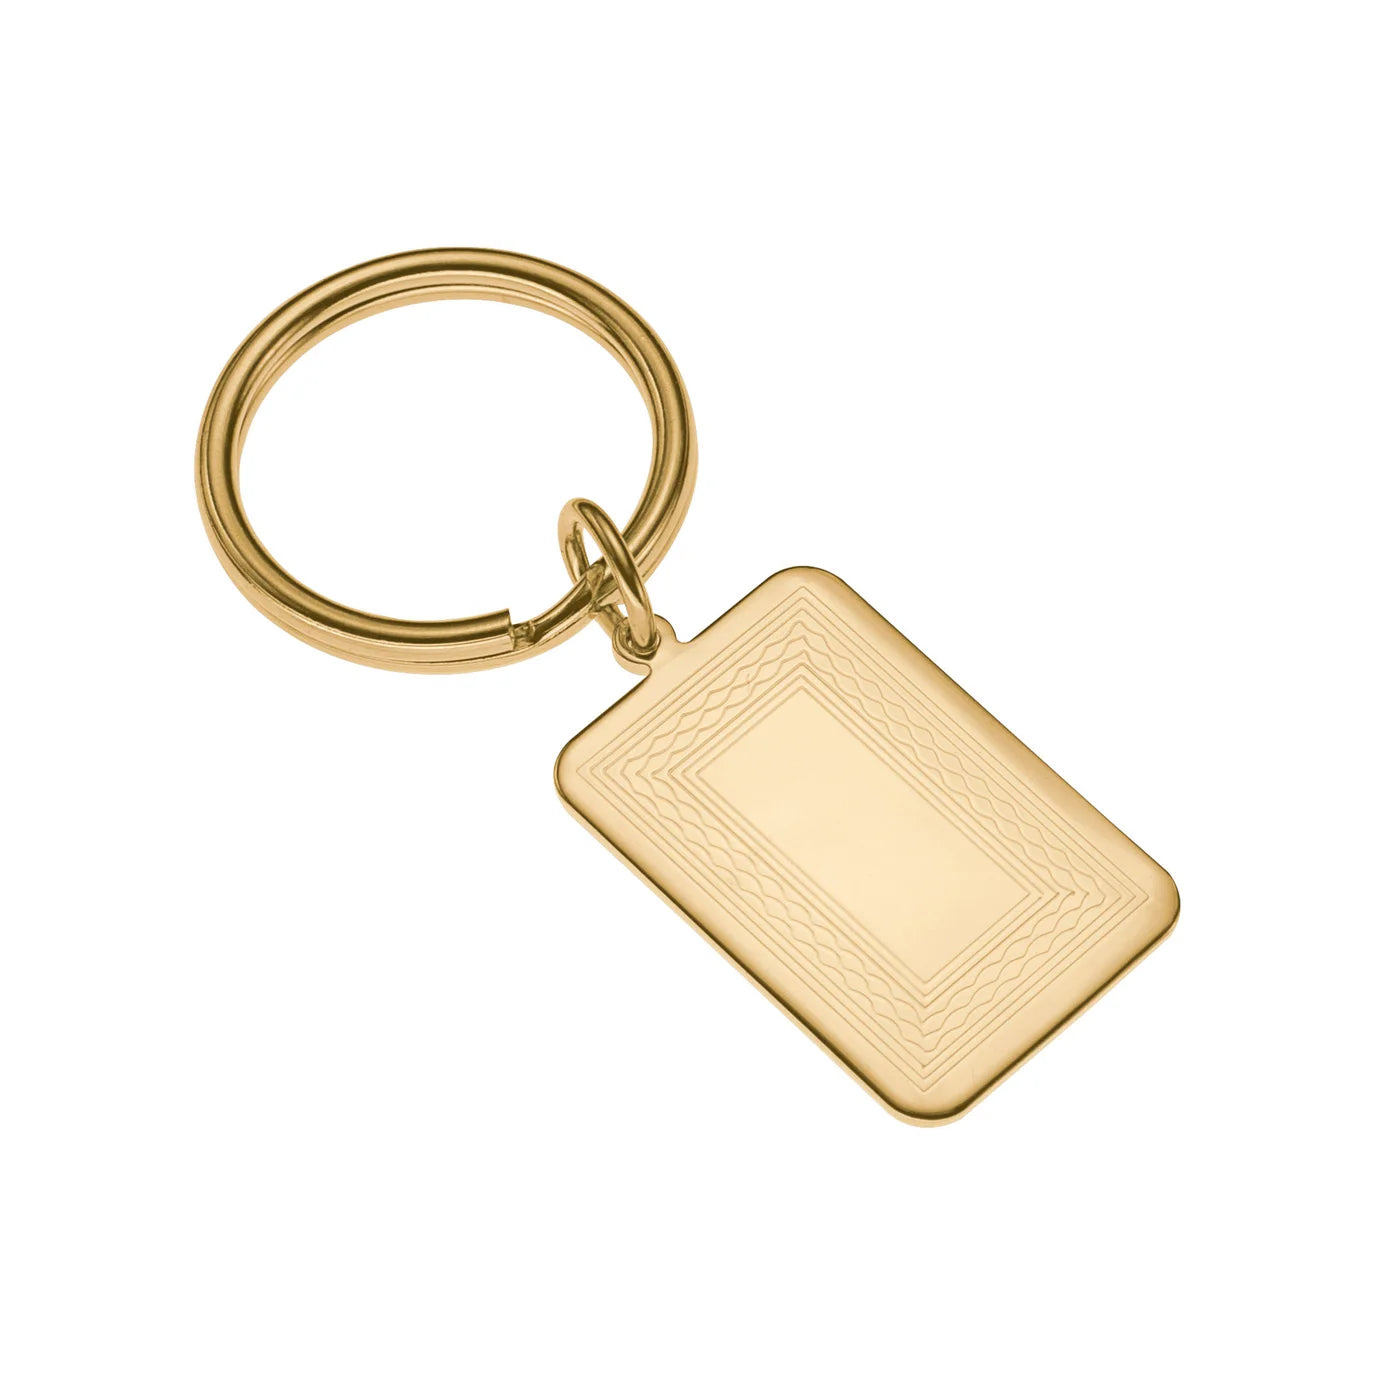 Gold Finish Polished Engravable Key Chain with Patterned Border